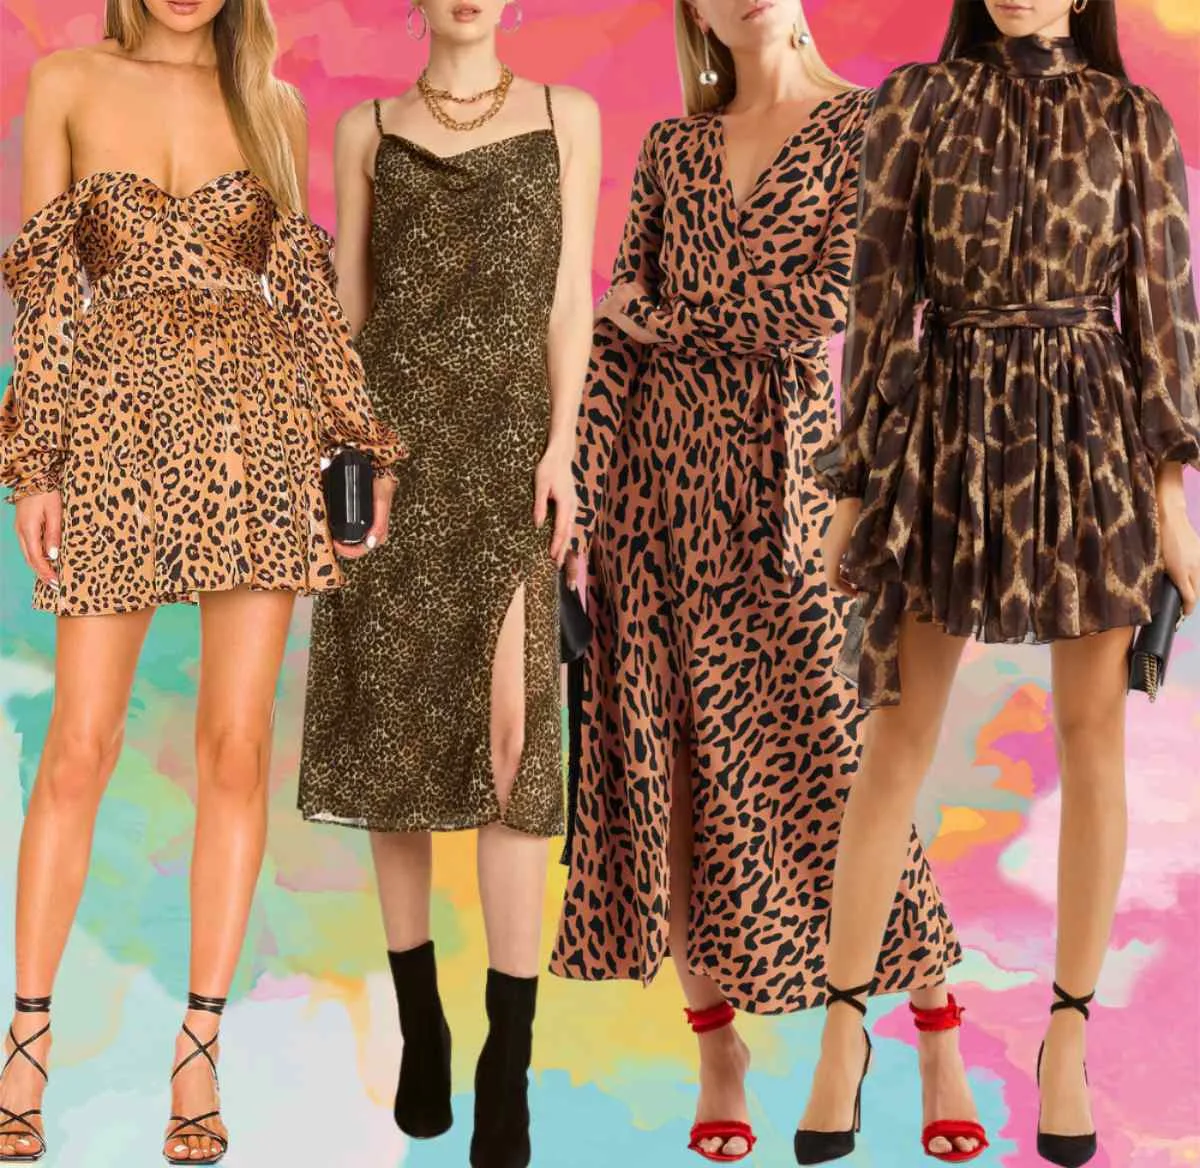 3 women wearing different color shoes with fancy leopard print dress outfits.